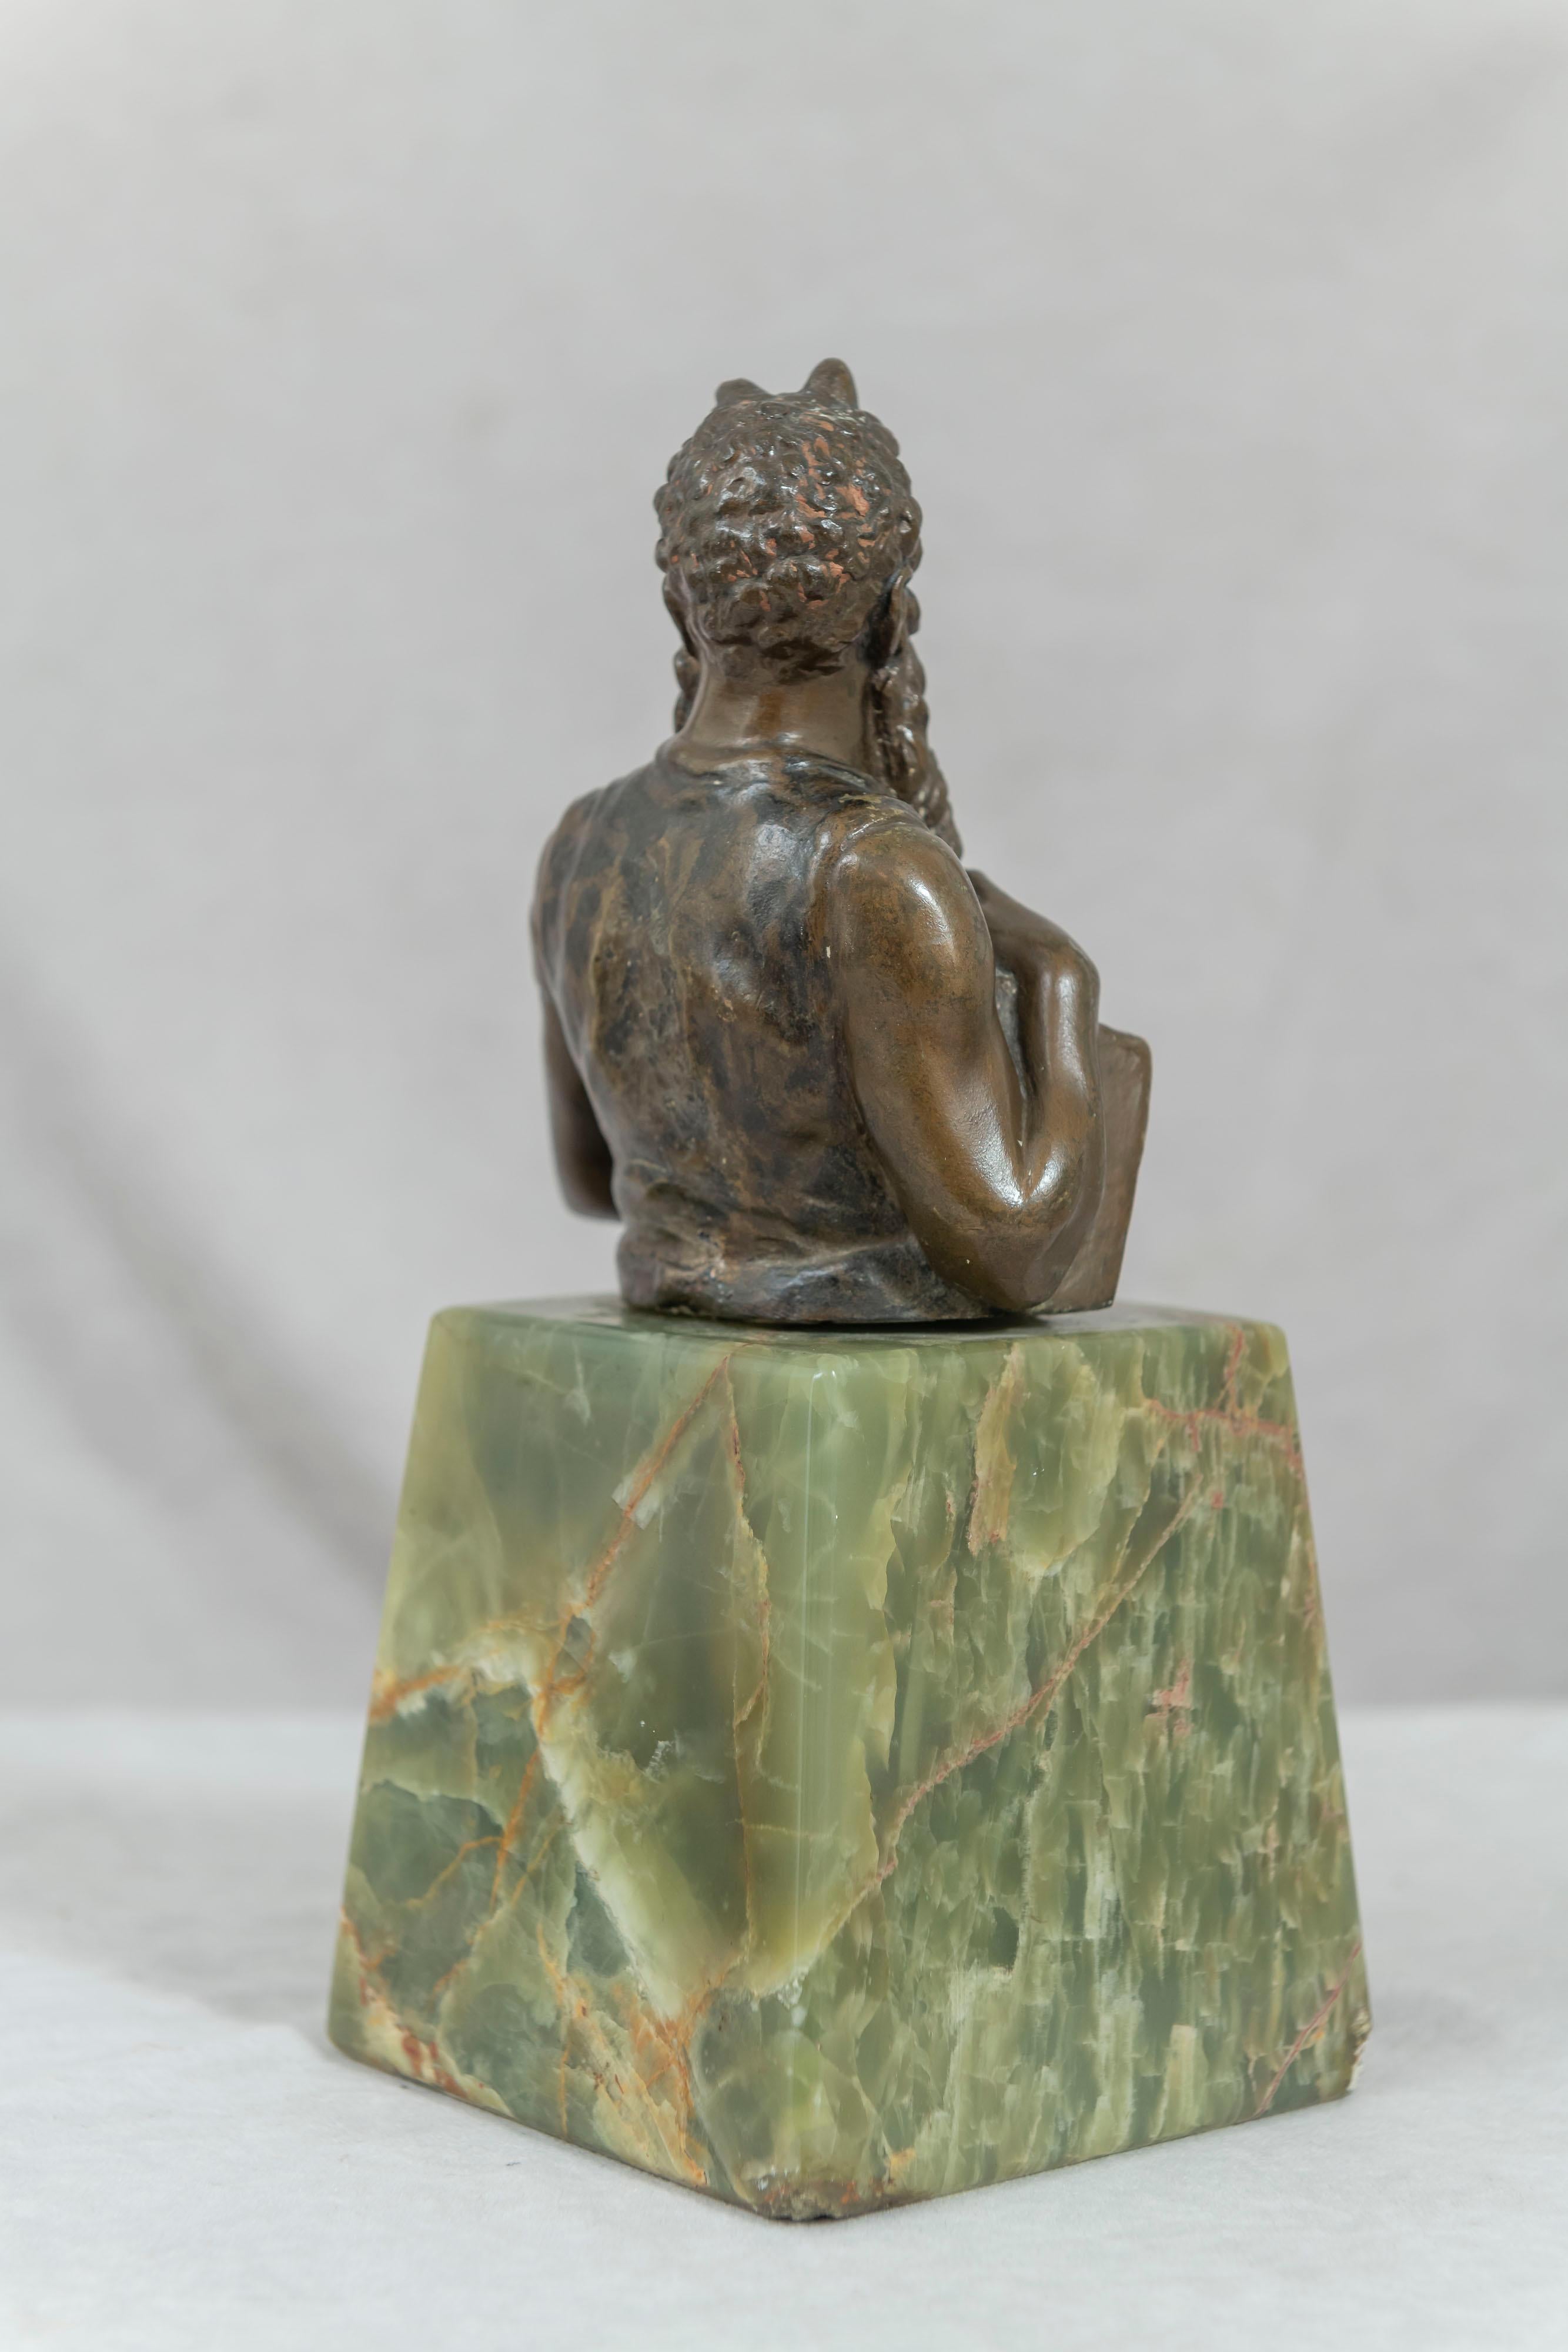 Patinated Antique Bronze Bust of Moses Mounted on Onyx with Plaque of 10 Commandments